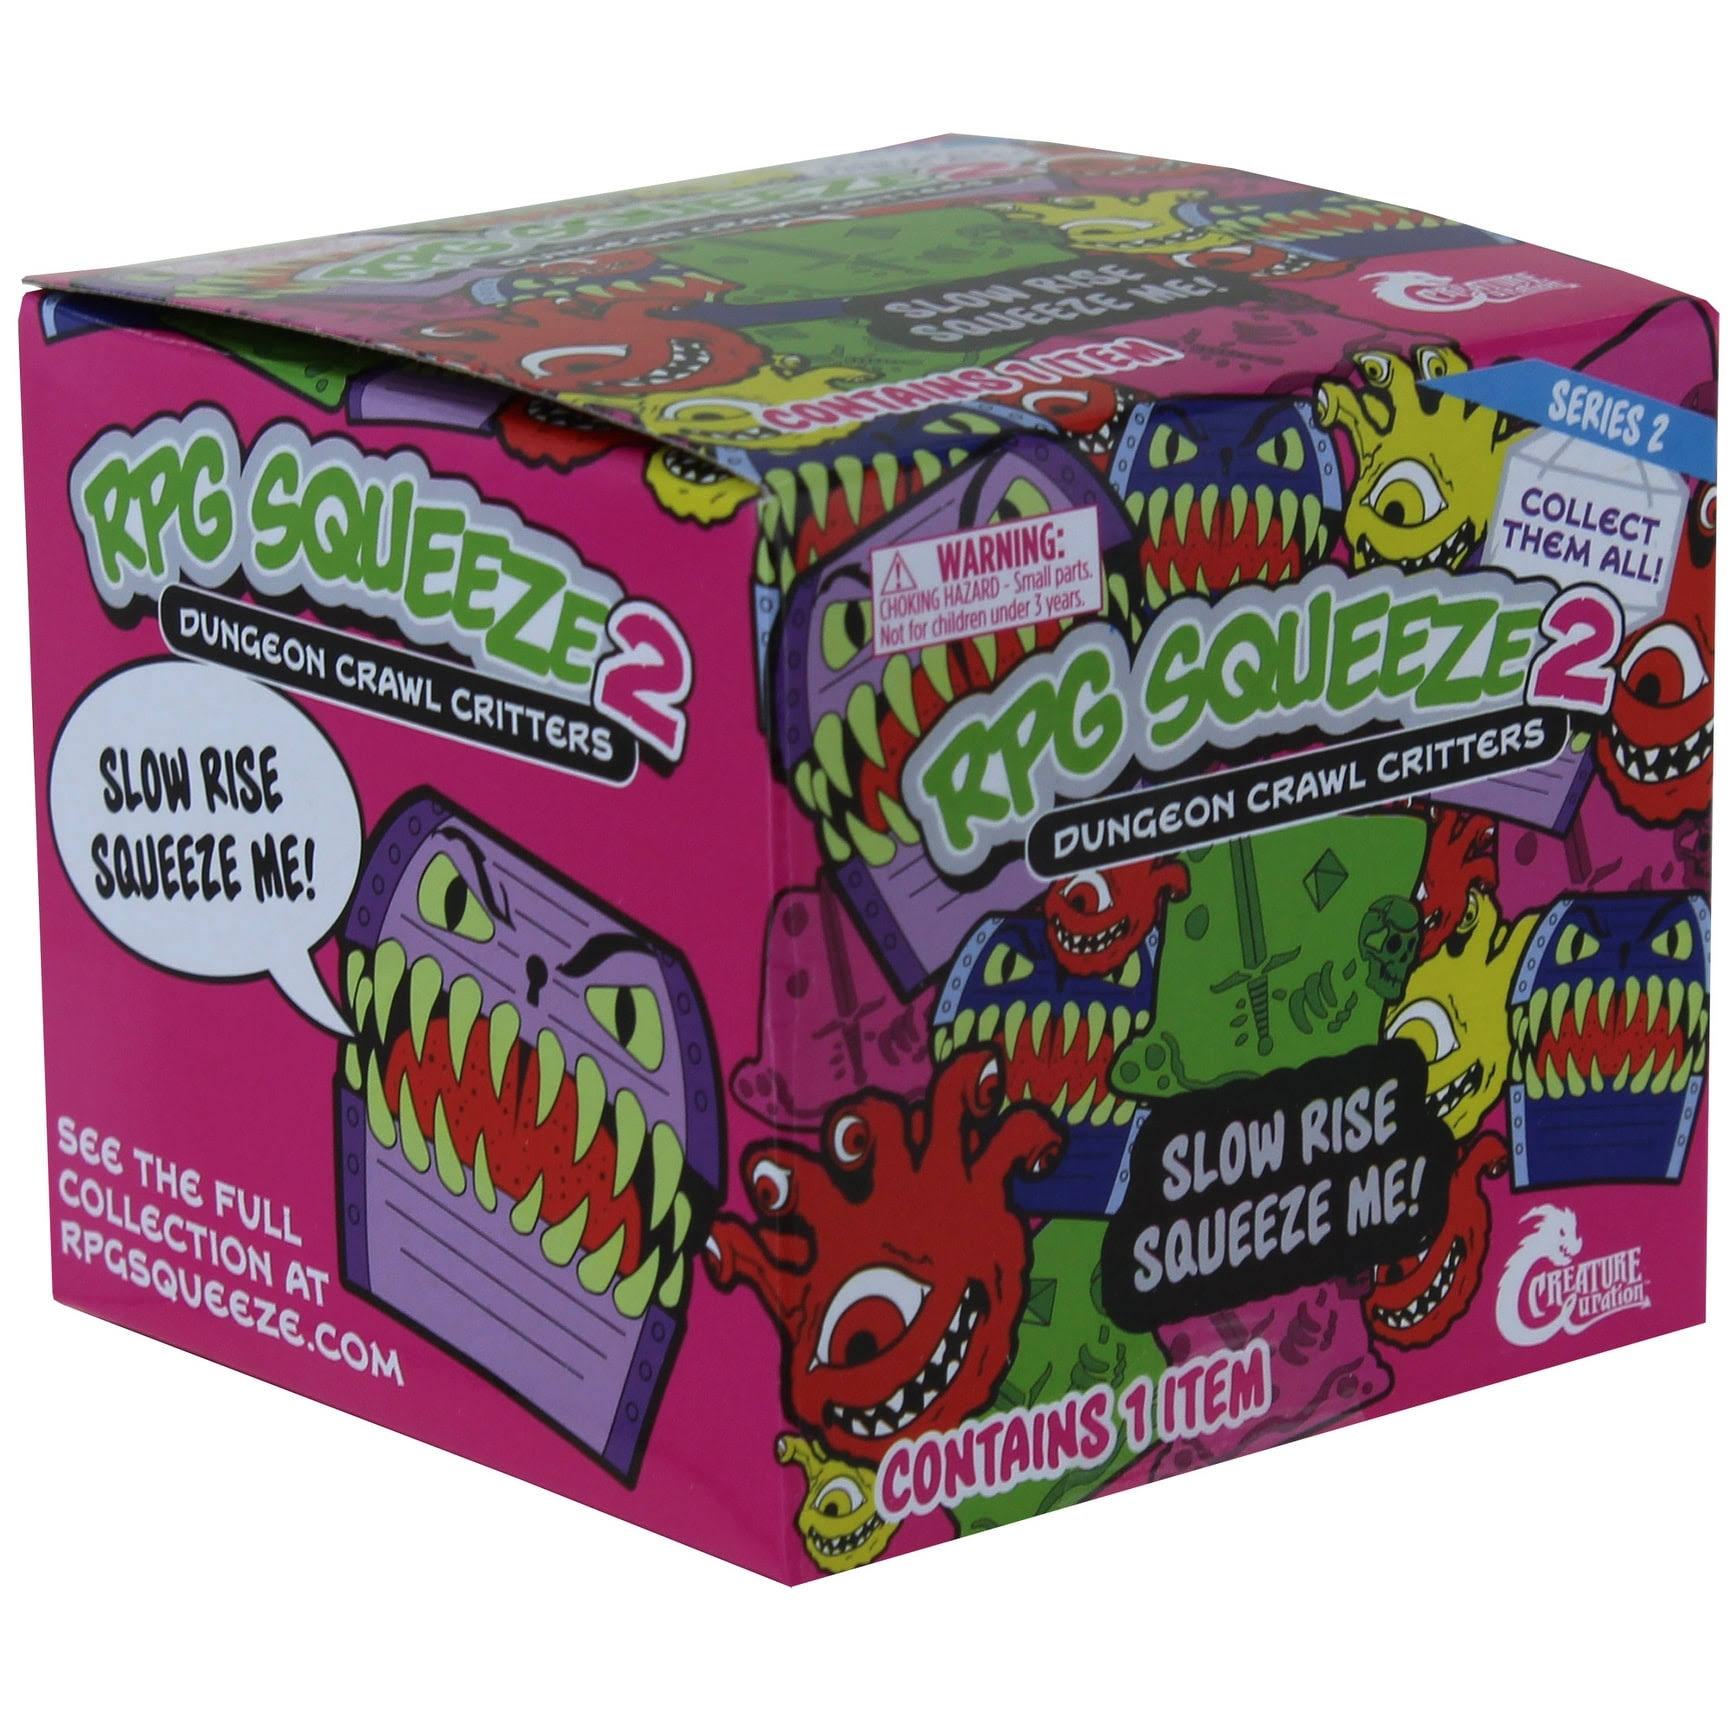 RPG Squeeze 2 Dungeon Crawl Critters Series 2